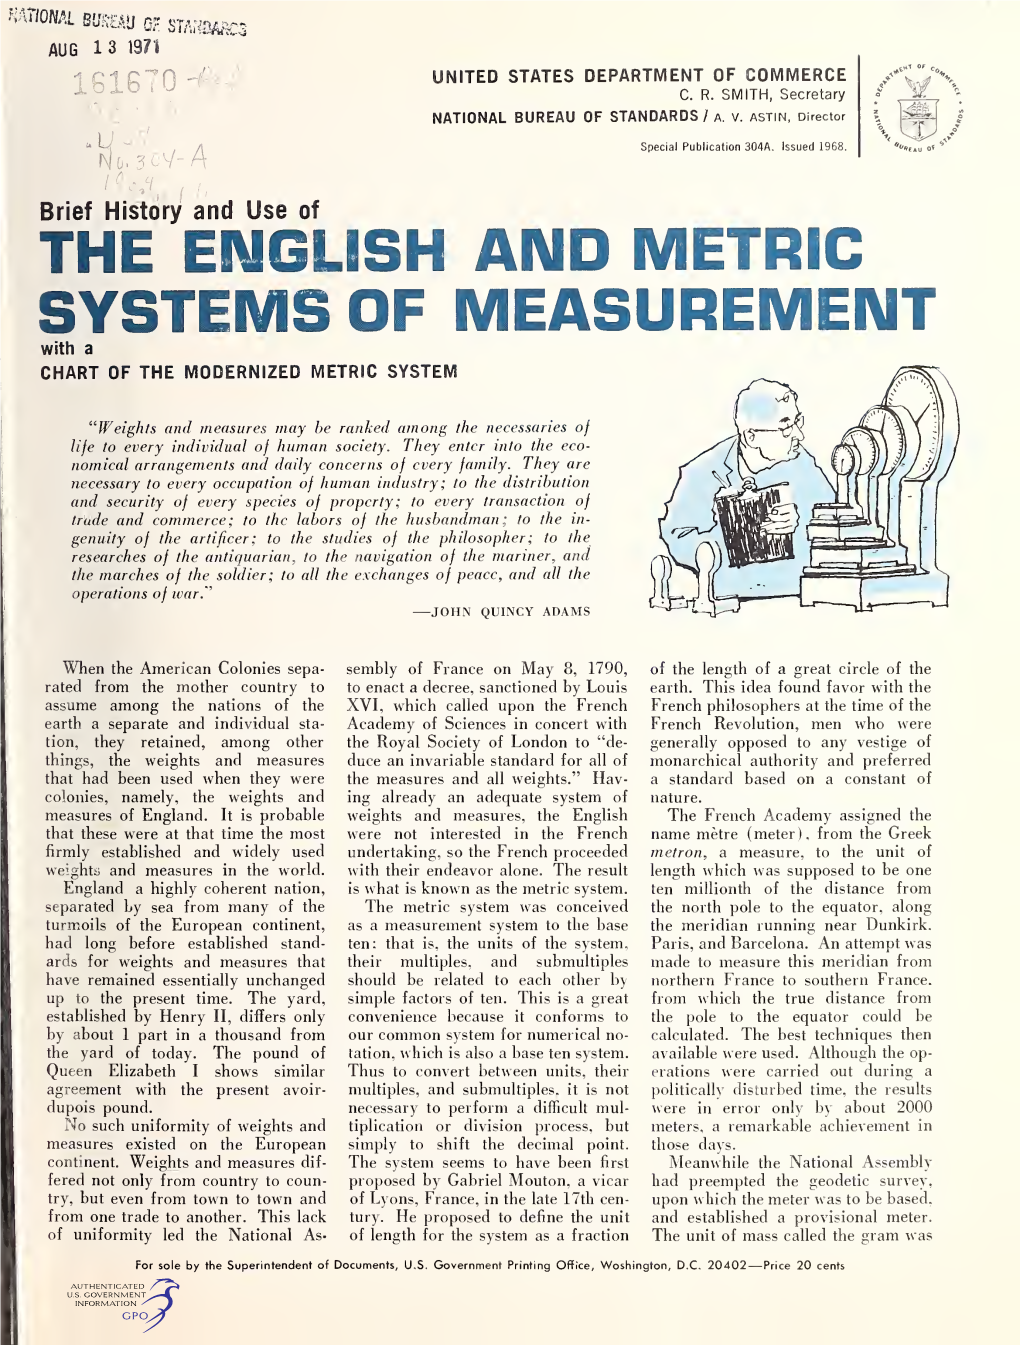 Brief History and Use of the ENGLISH and METRIC SYSTEMS of MEASUREMENT with a CHART of the MODERNIZED METRIC SYSTEM